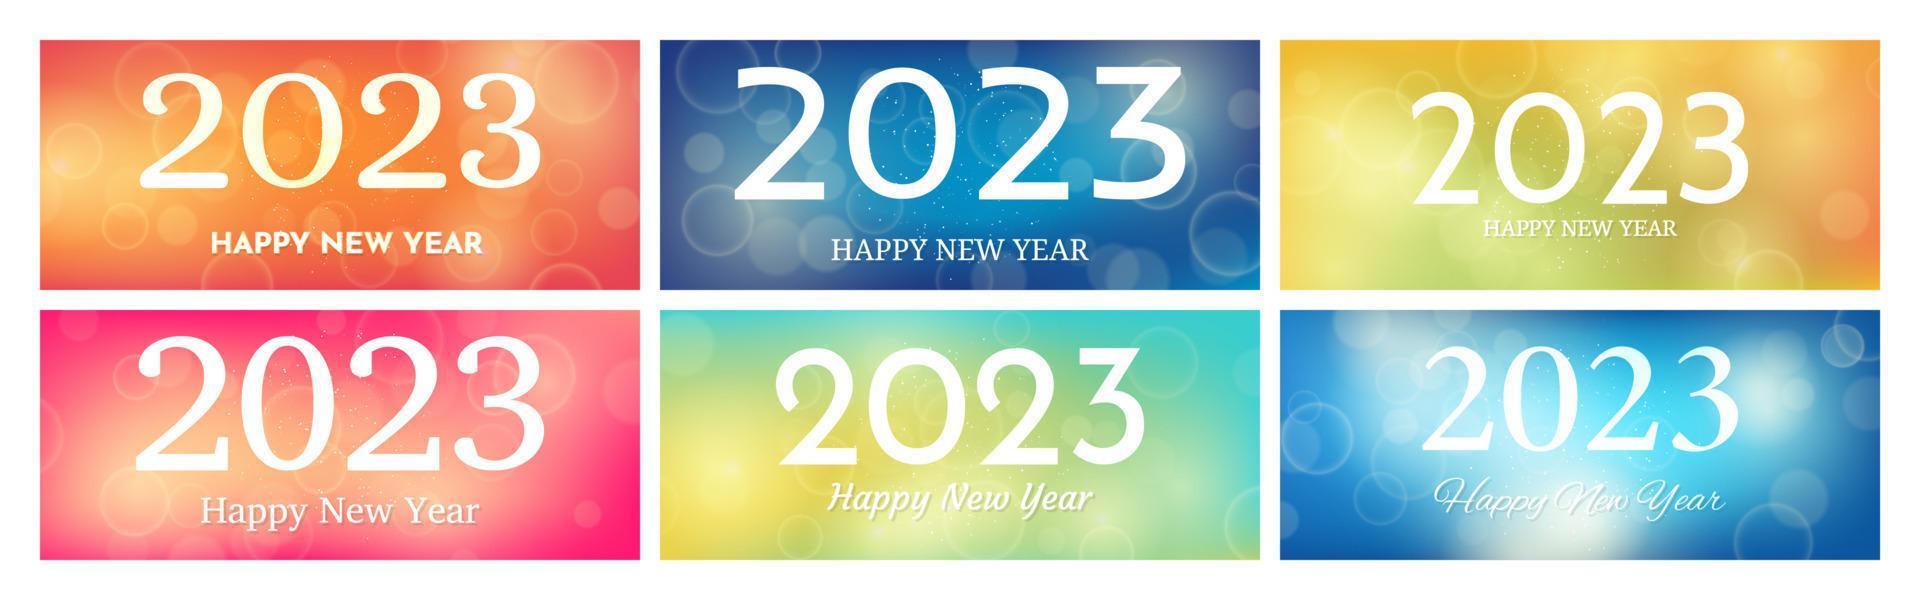 Happy new year 2023 incription on blurred background vector